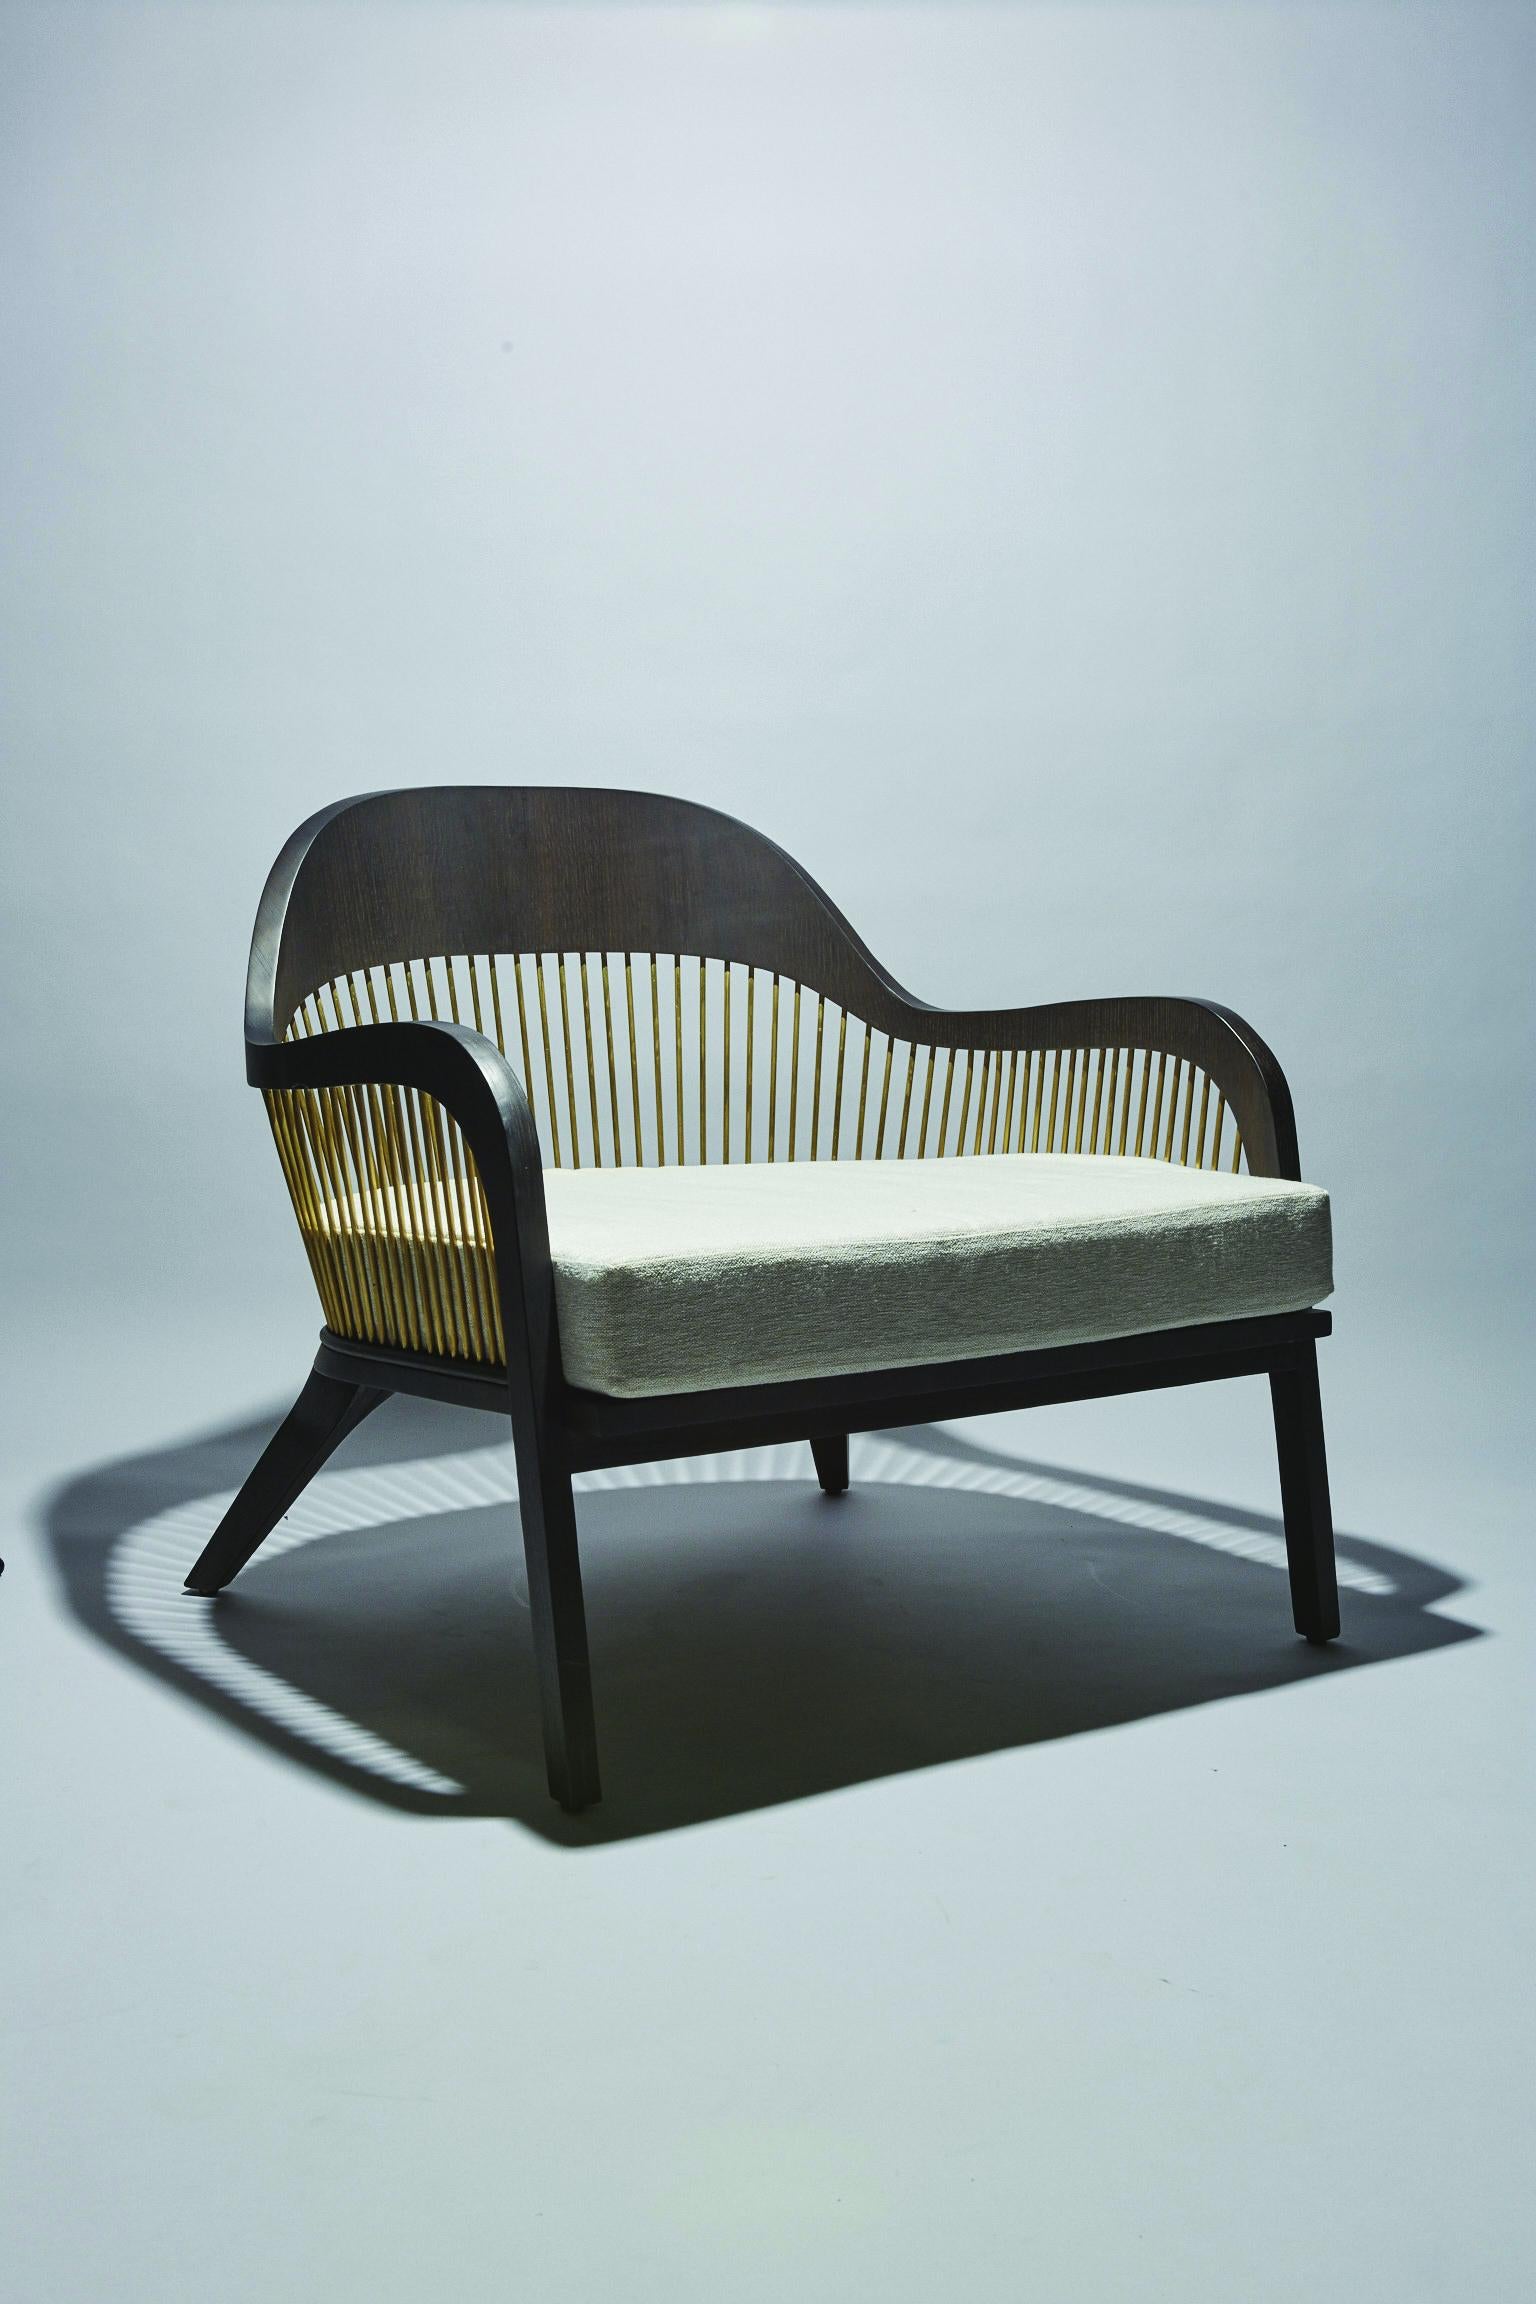 Philippine Lanka Armchair, by Reda Amalou Design, 2015 -  Contemporary bergere seat For Sale